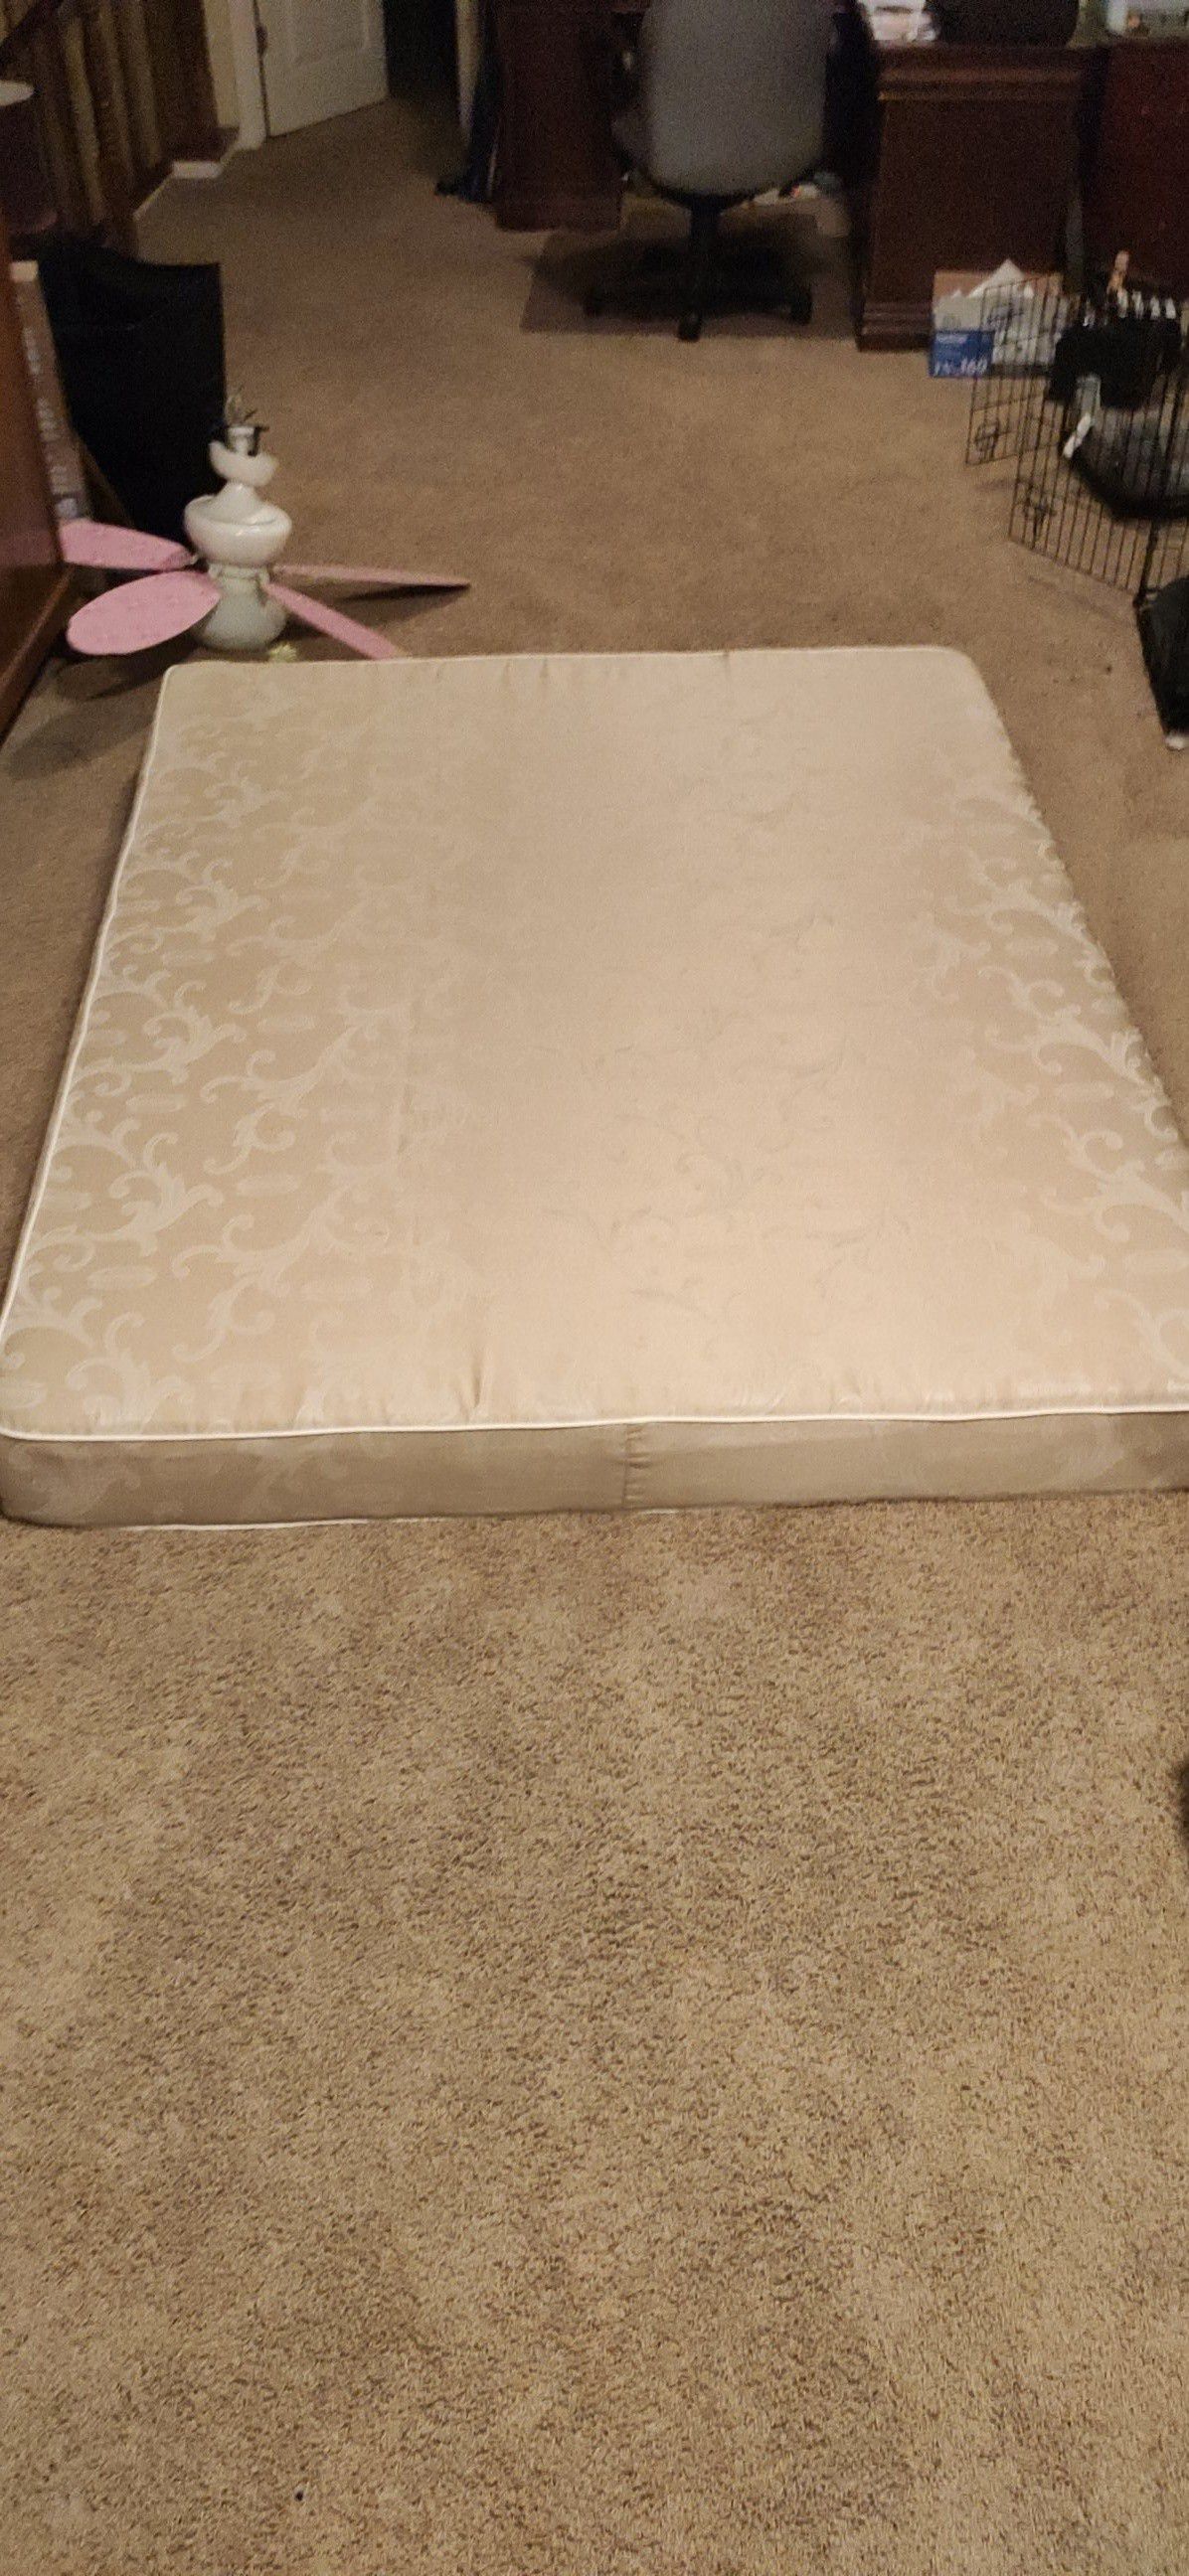 Queen sized mattress for RV or travel trailer